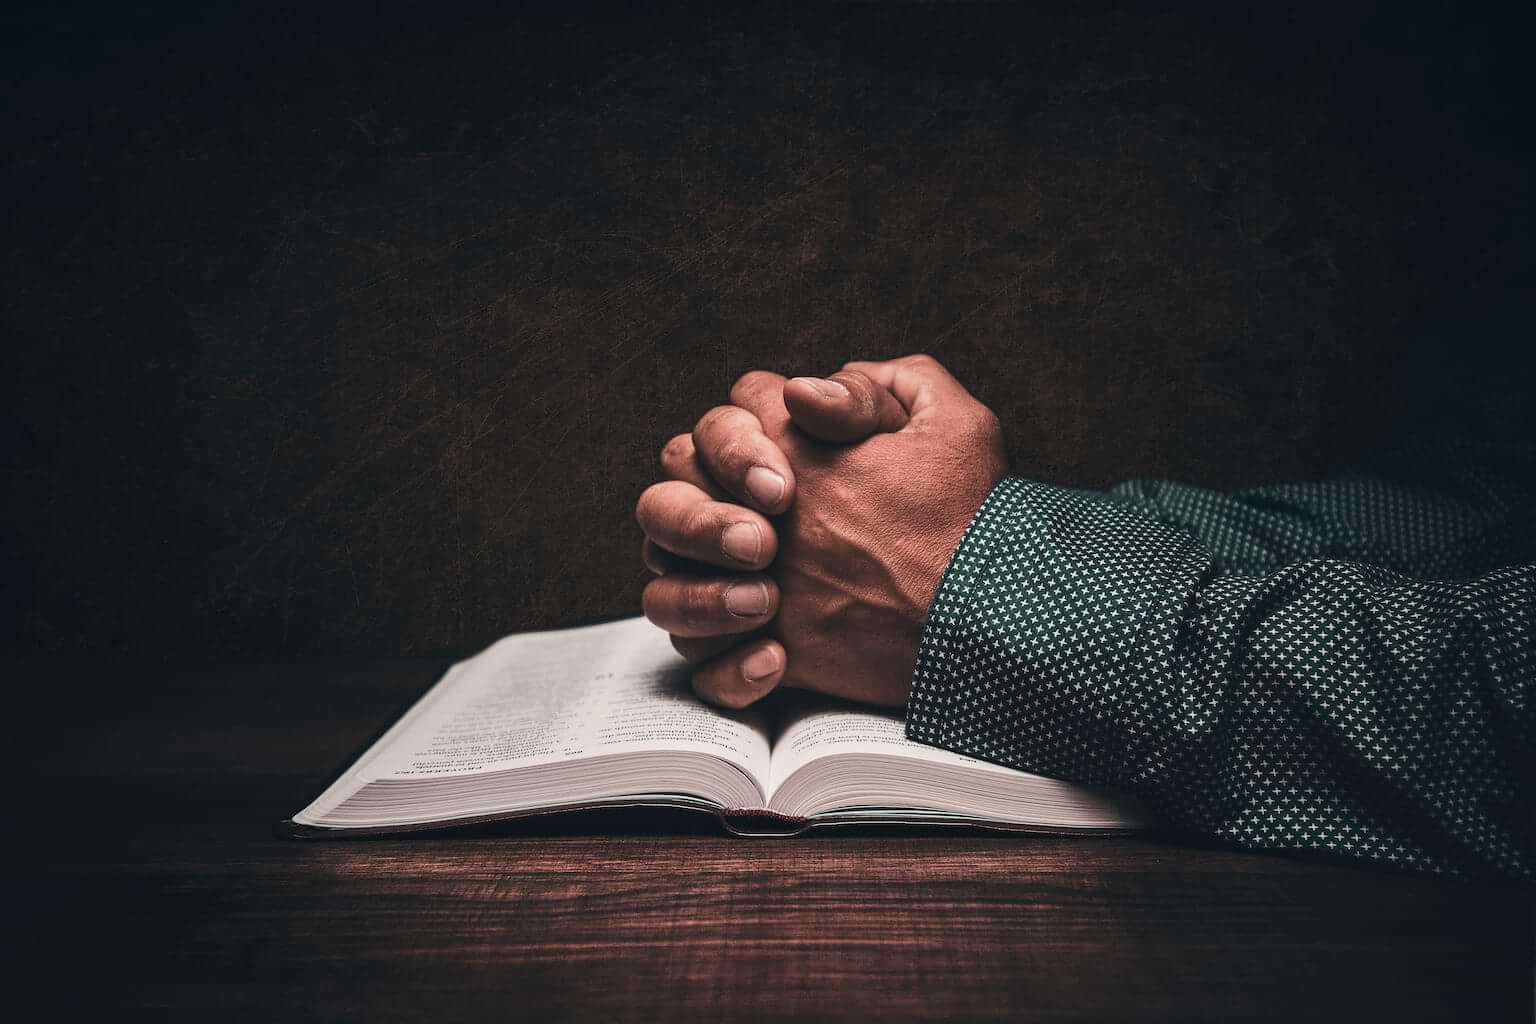 Hands folded in prayer on top of a Bible. By JavierArtPhotography/stock.adobe.com